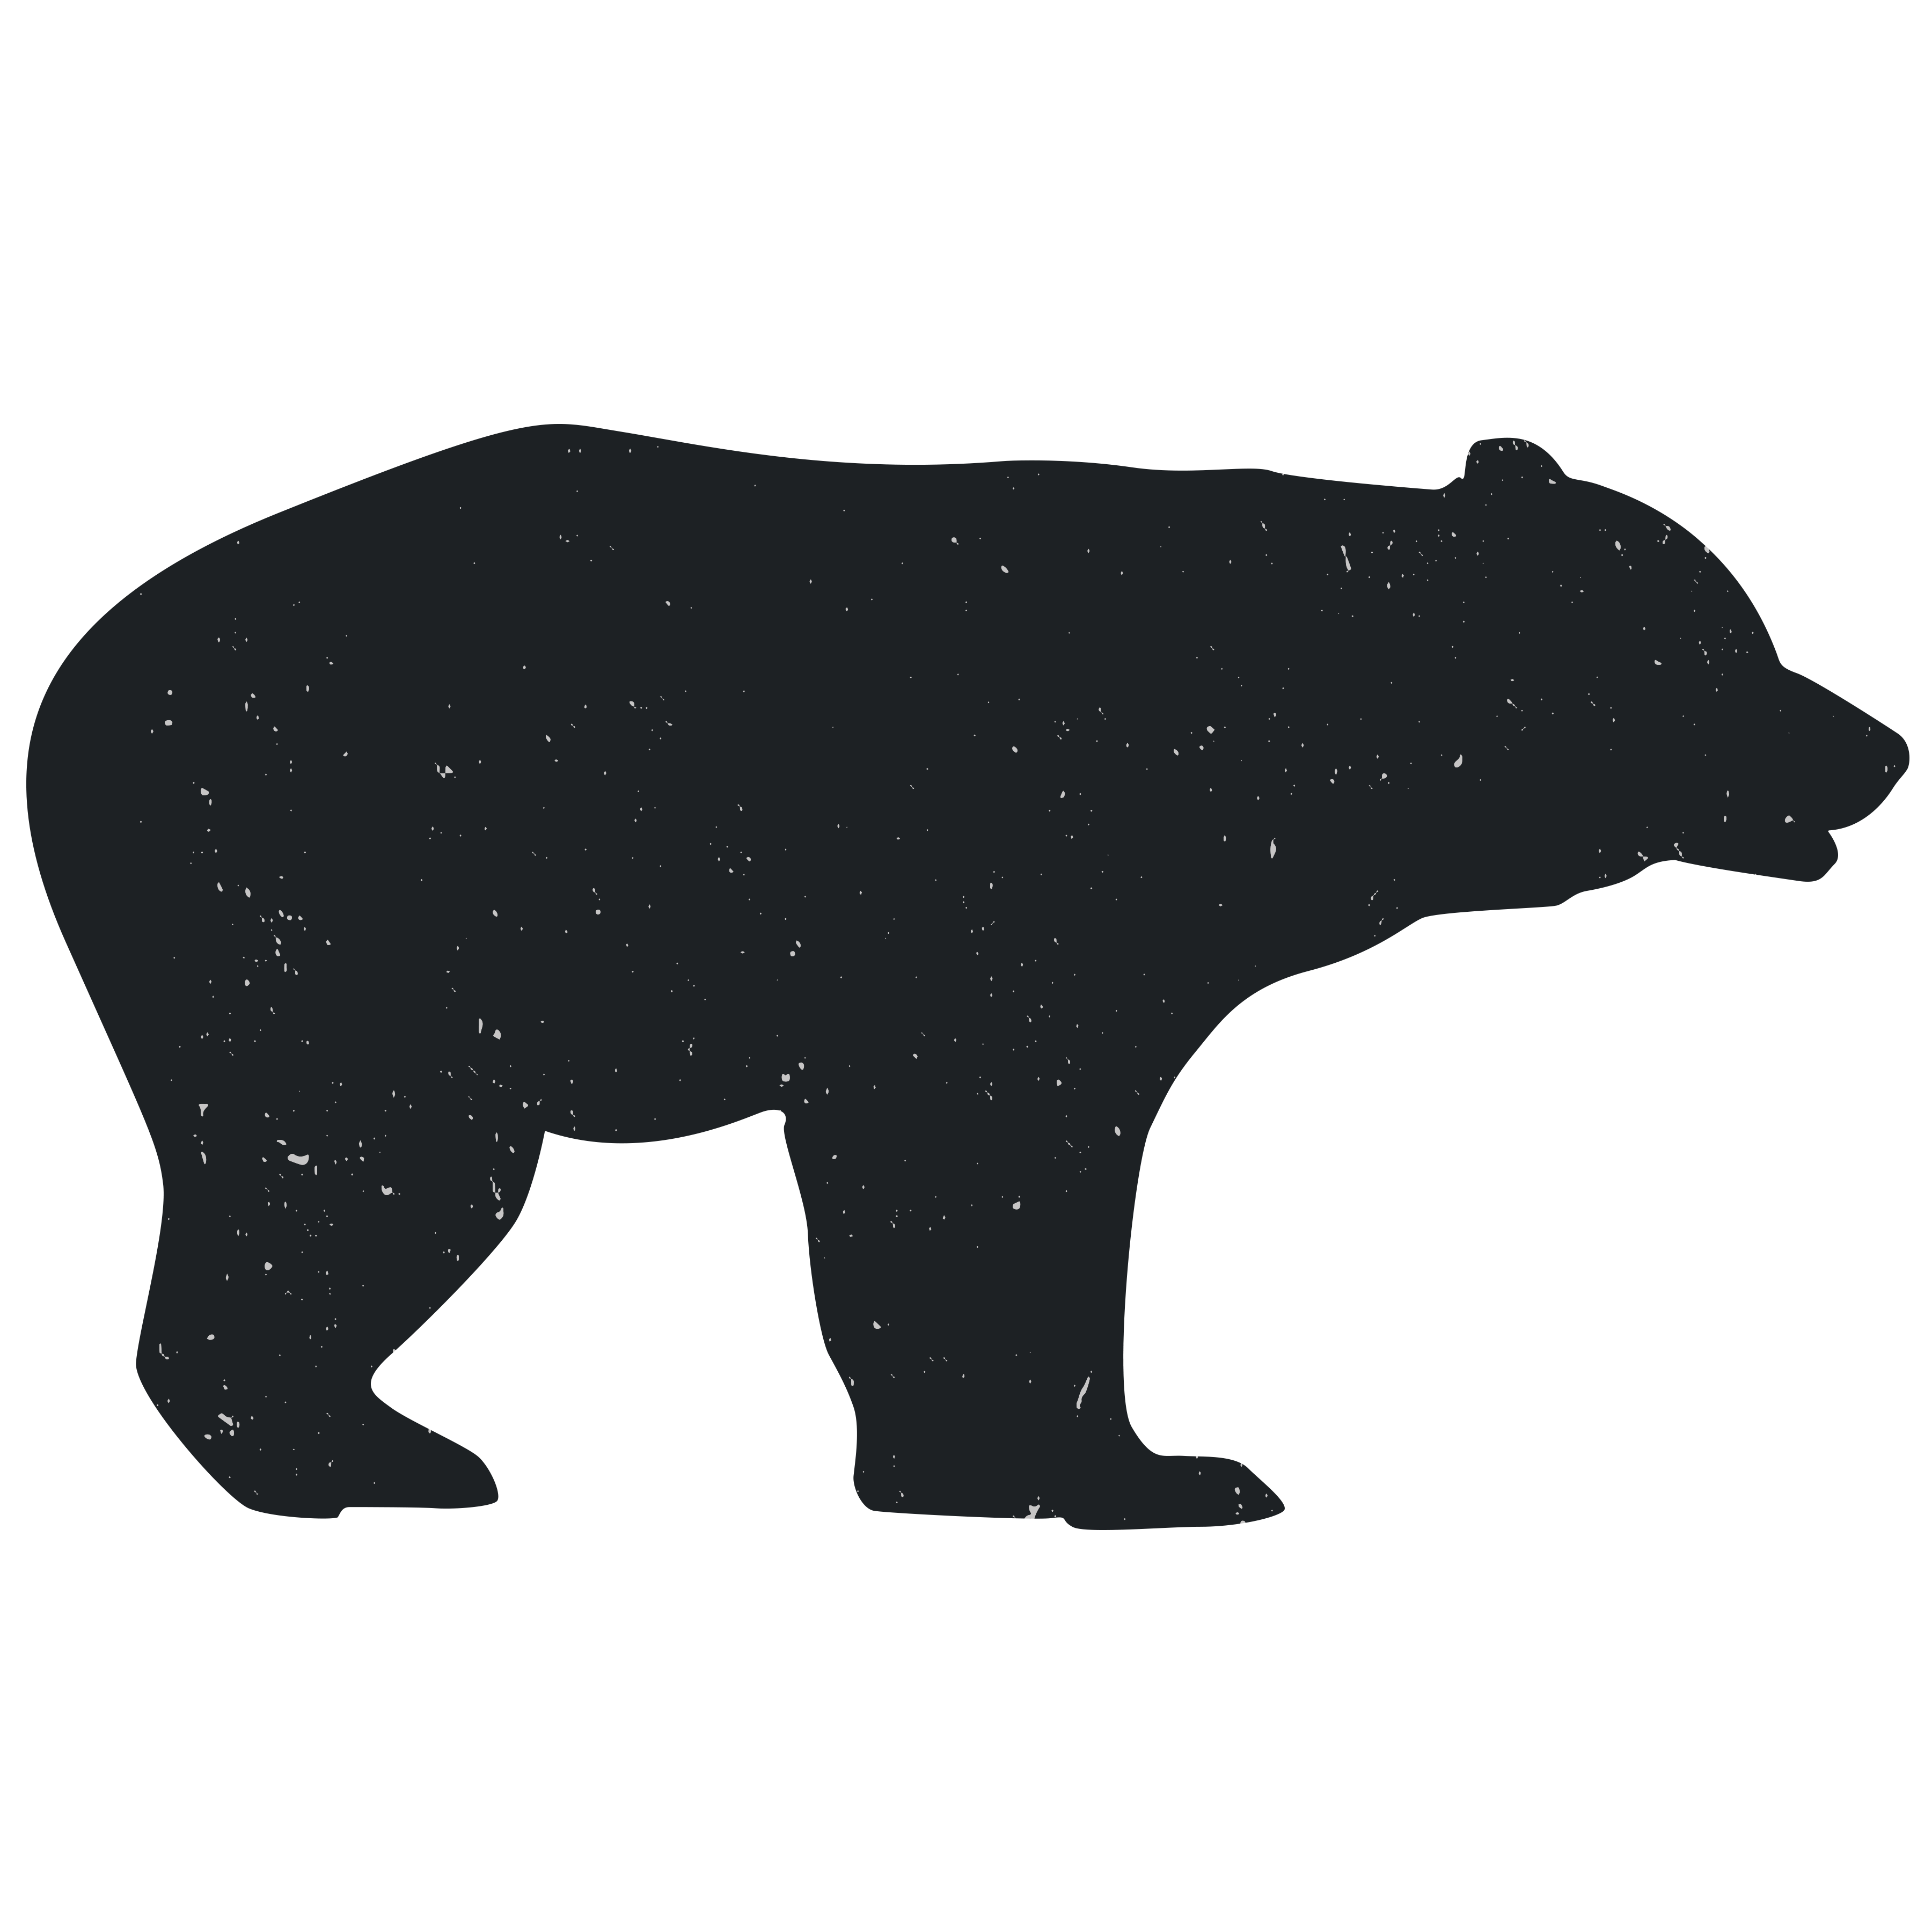 Bear Silhouette Dog Animal Animal Silhouettes Png Download 3600 